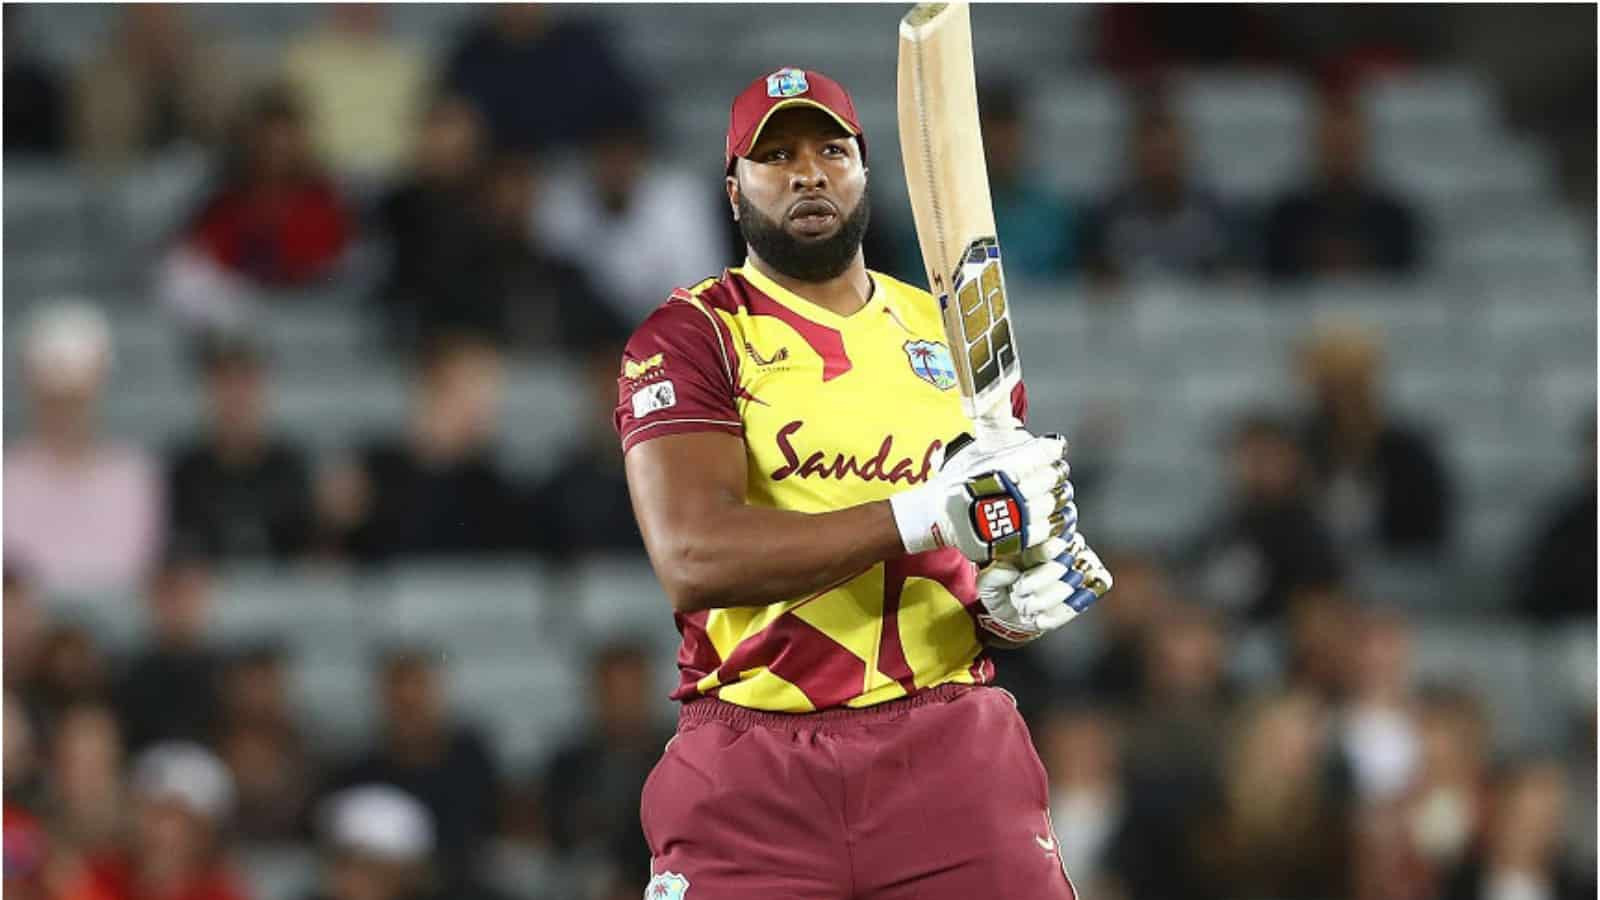 WI v SL 2021: Pollard says his feat of six 6s in an over will be up there because it came in international cricket